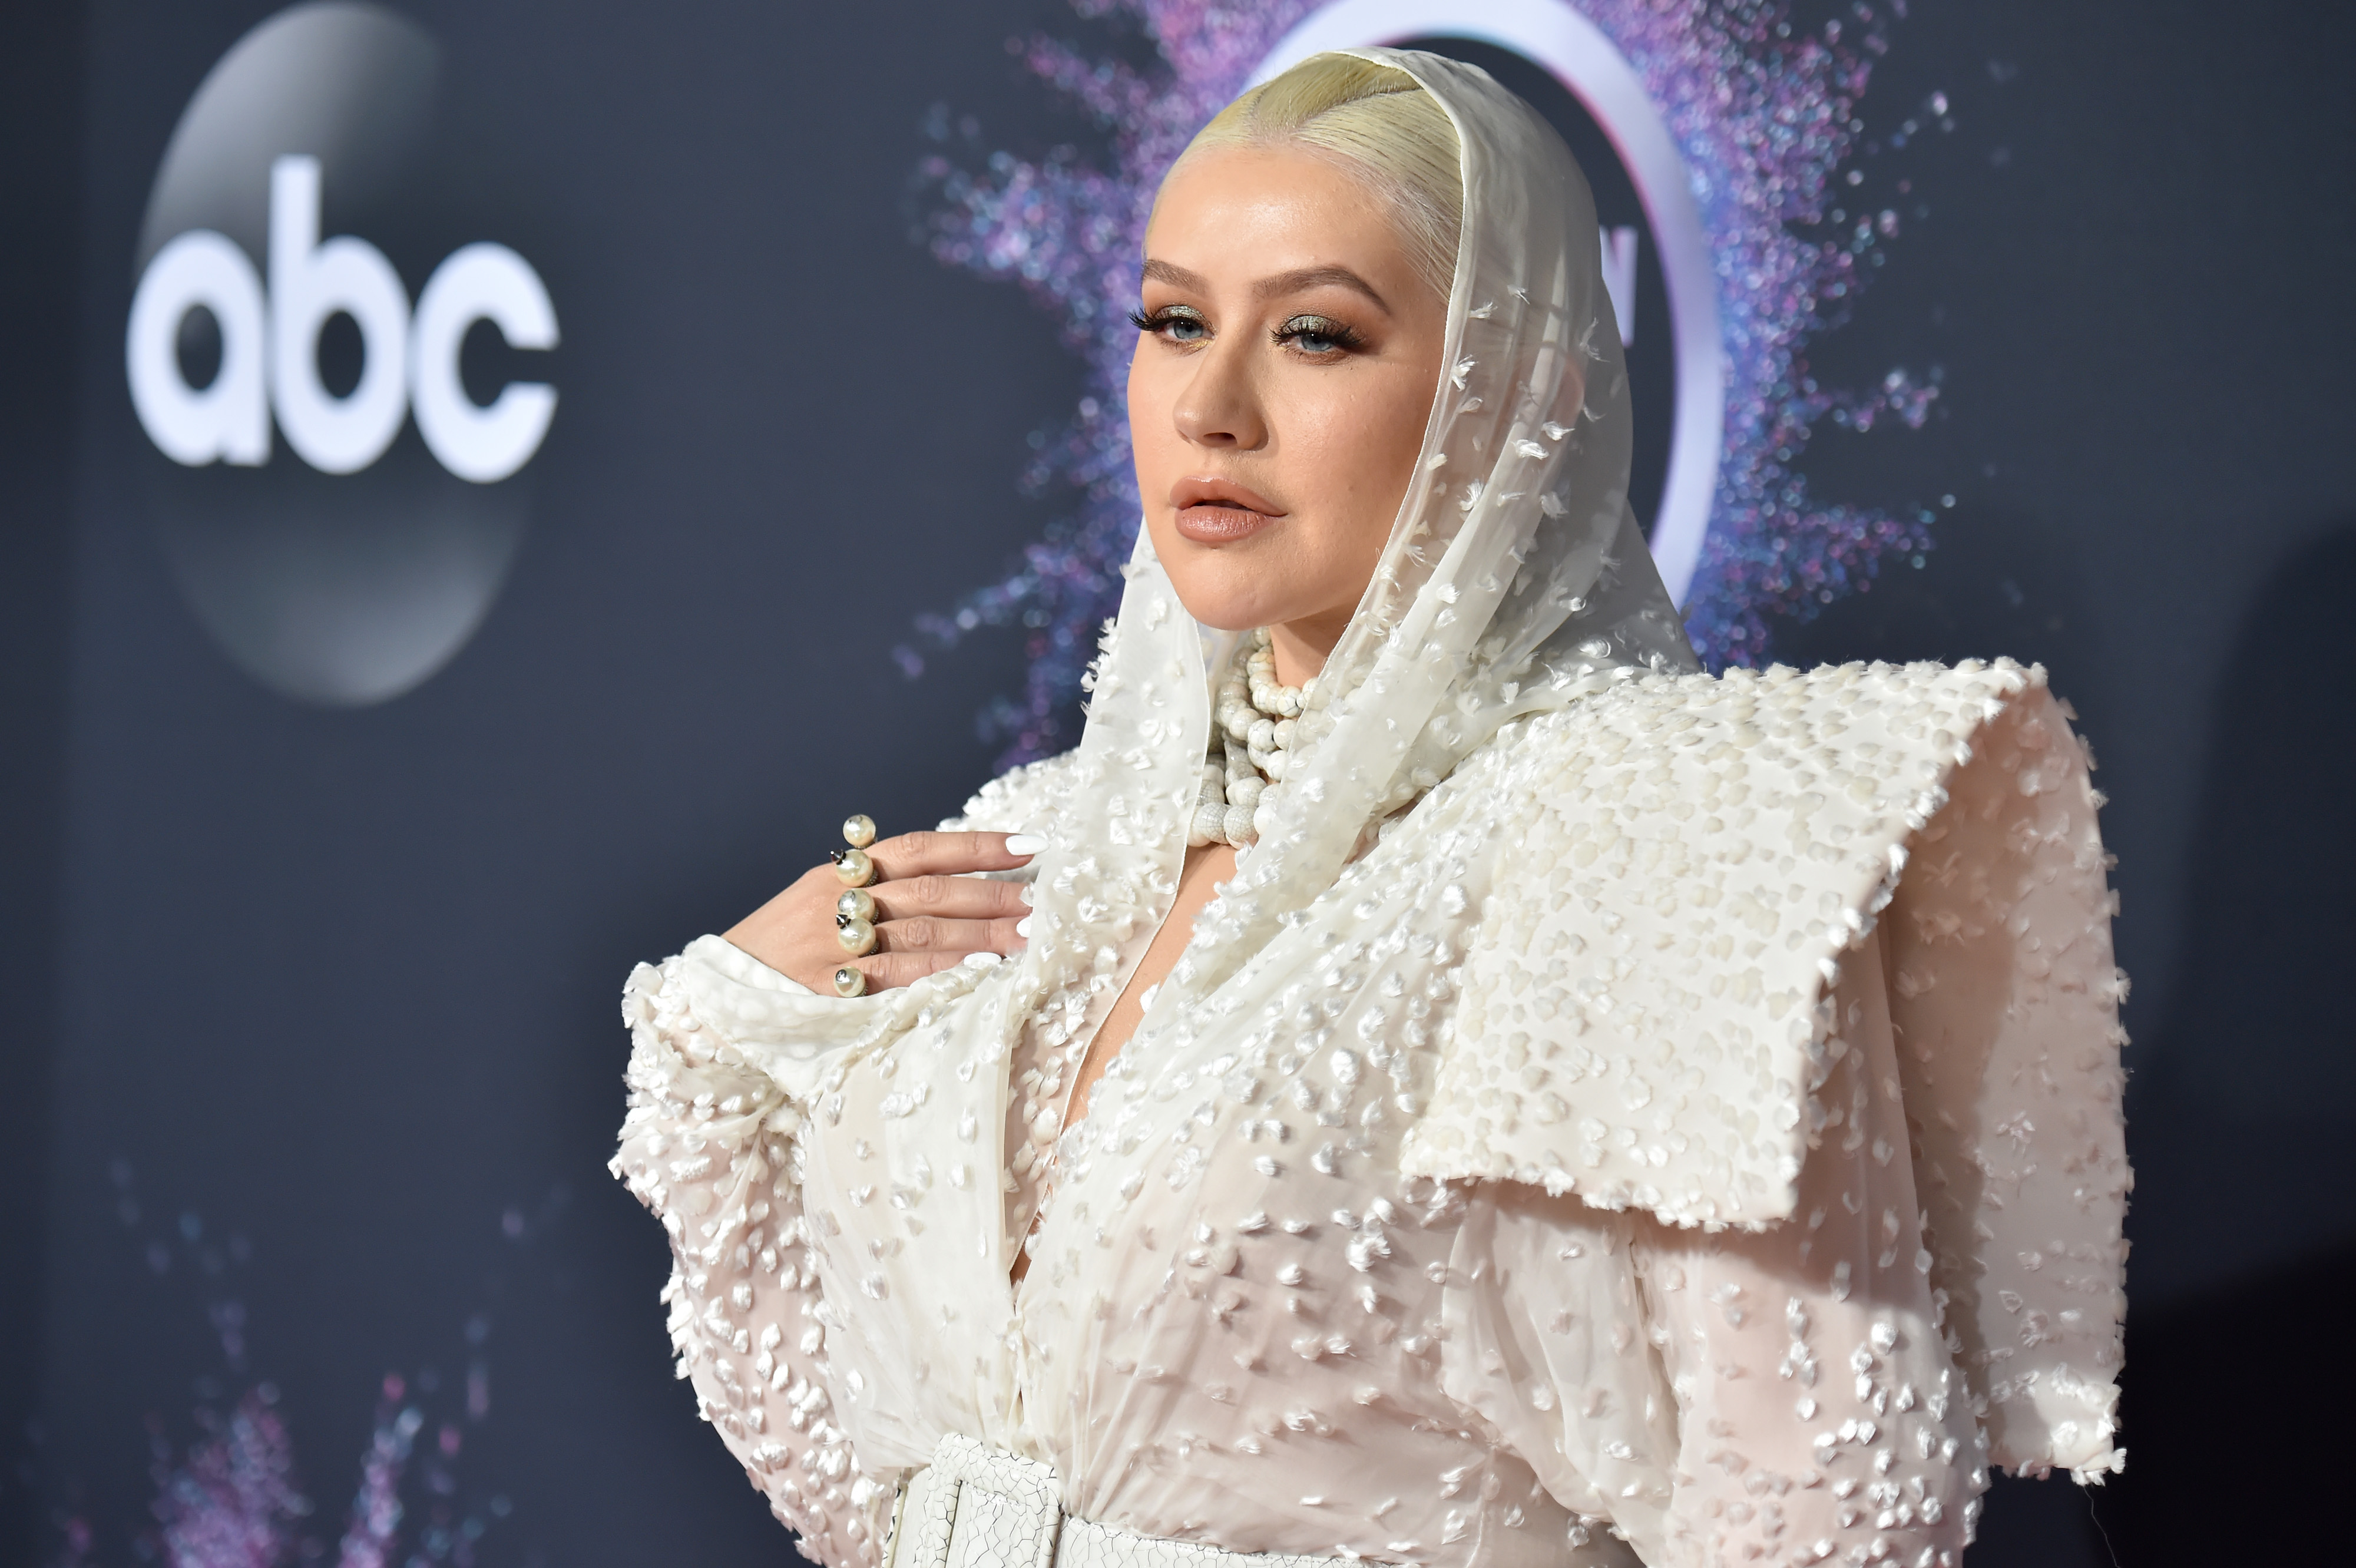 Christina Aguilera attends the 2019 American Music Awards at Microsoft Theater on November 24, 2019 in Los Angeles, California. | Source: Getty Images